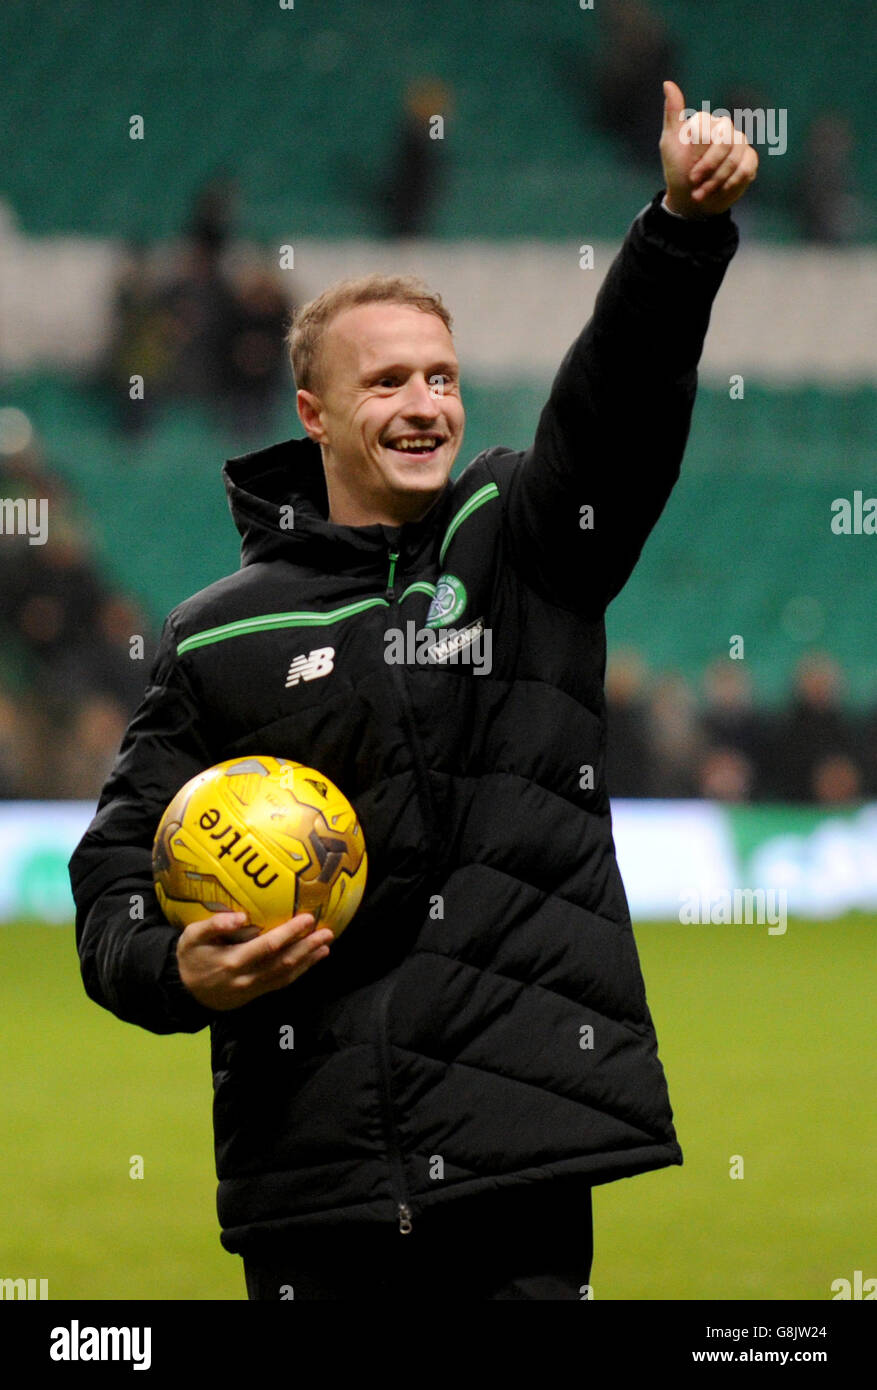 Celtic's Leigh Griffiths at the end of the match with the ball after scoring a hat-trick during the Ladbrokes Scottish Premiership at Celtic Park, Glasgow. Stock Photo